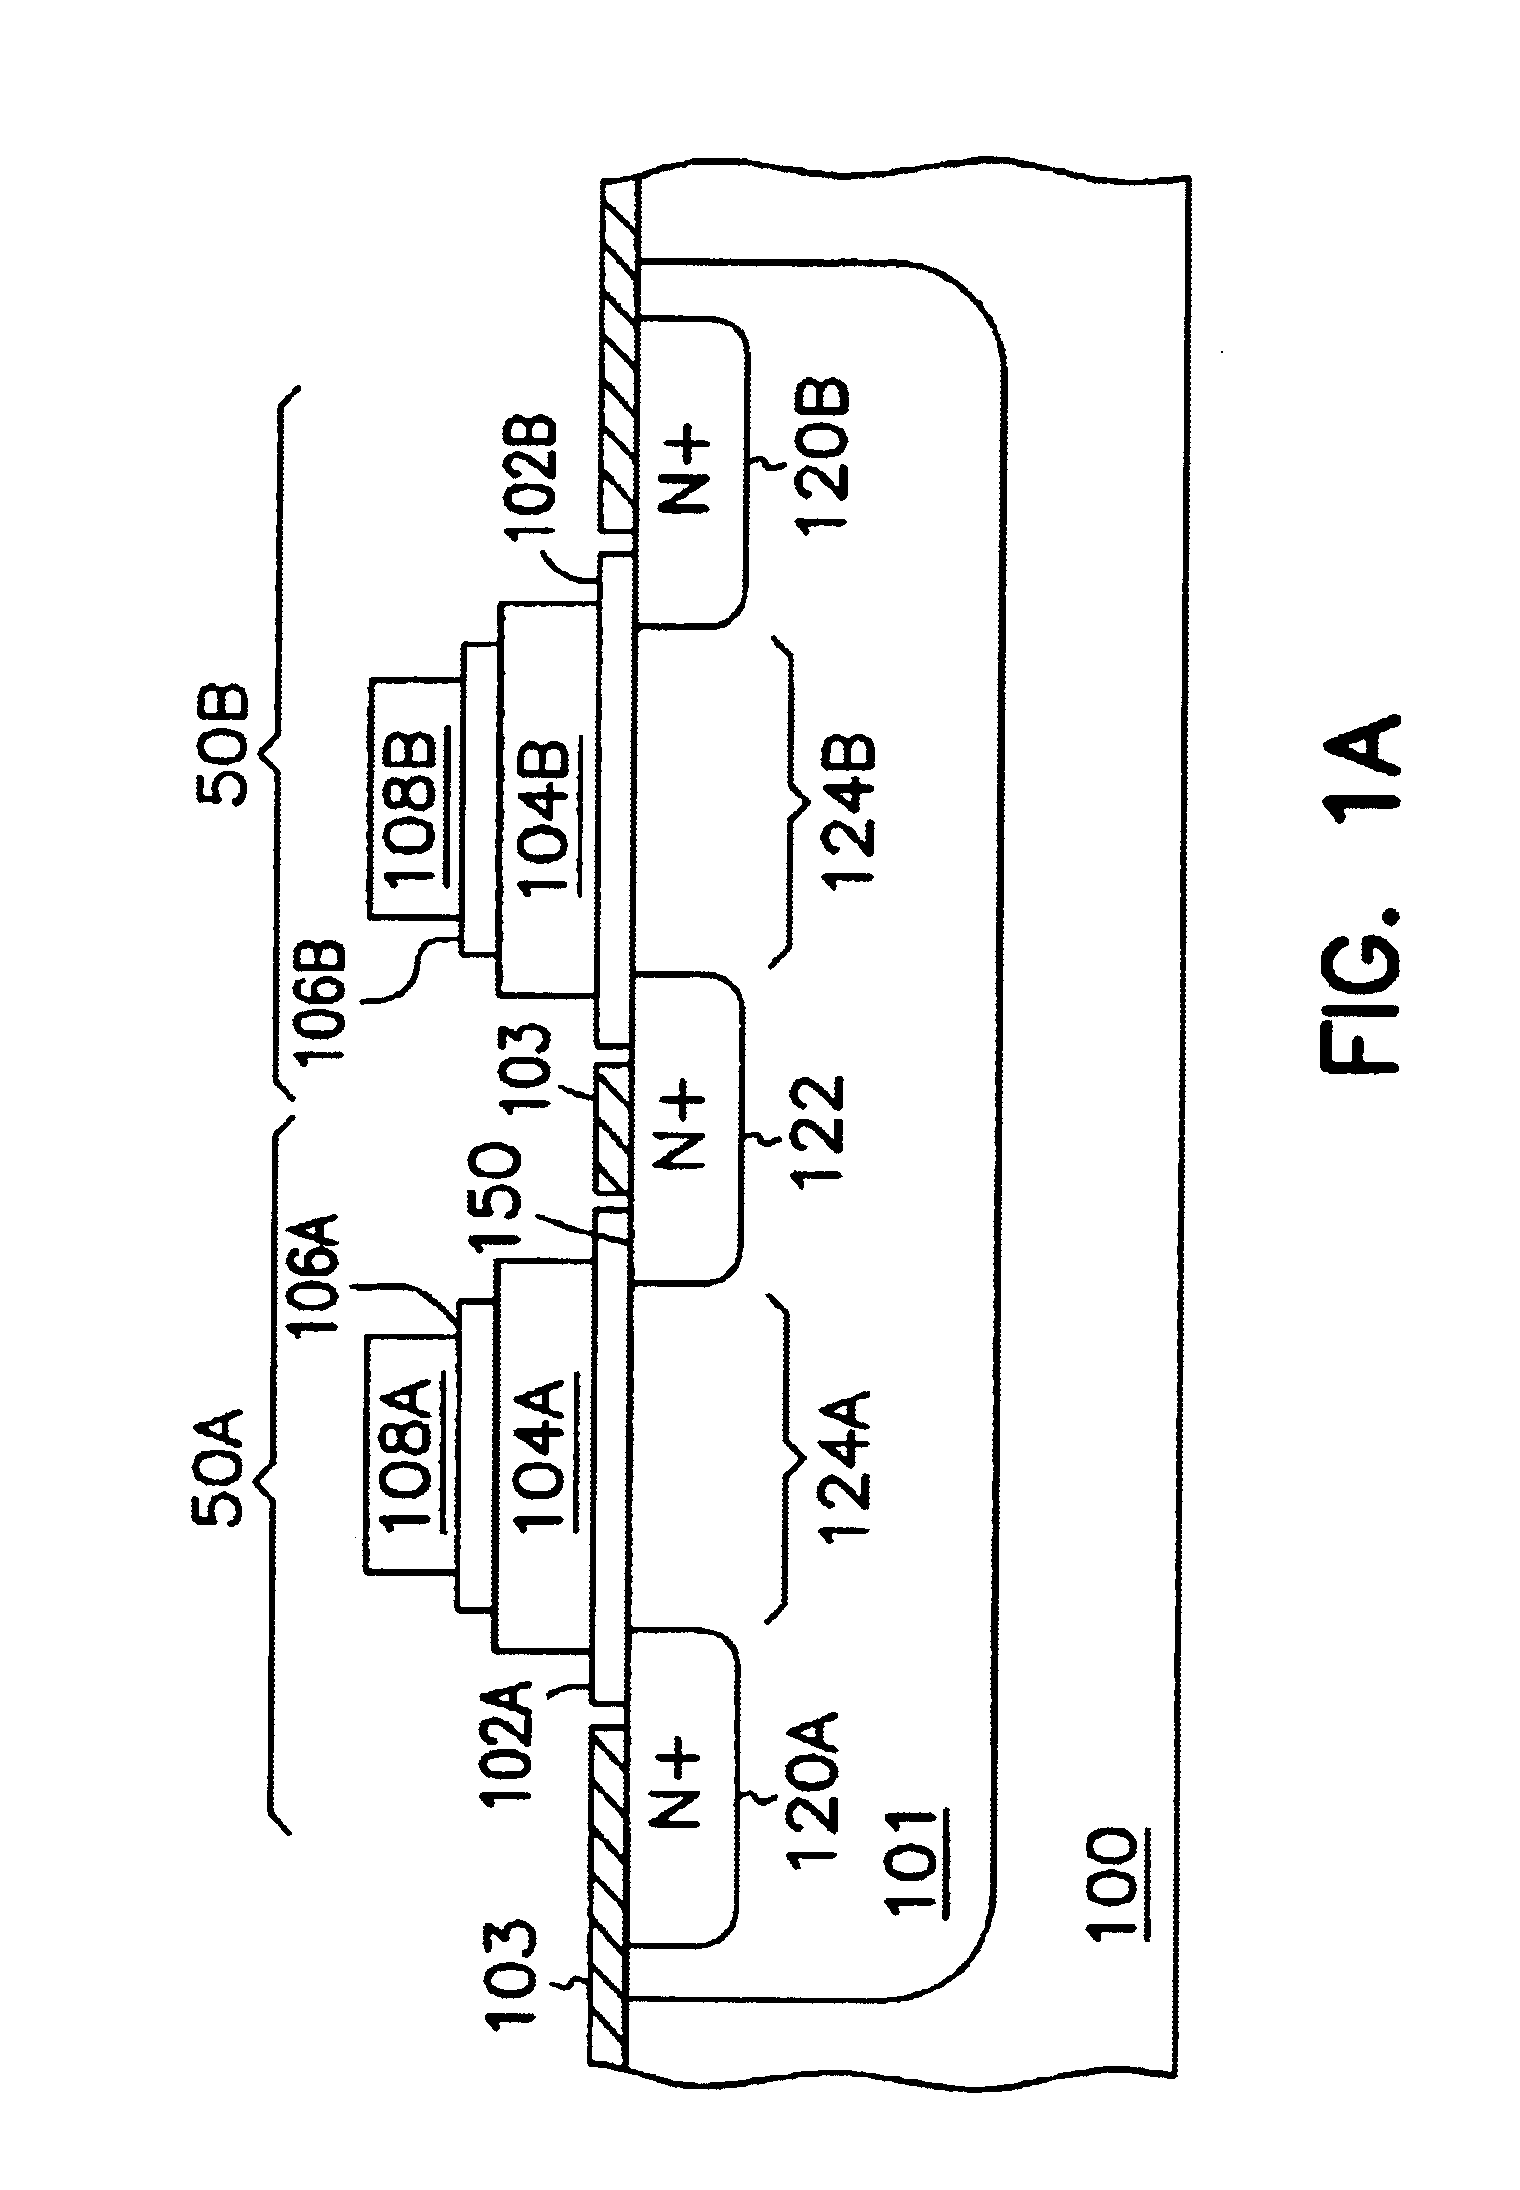 Methods for fabricating an improved floating gate memory cell